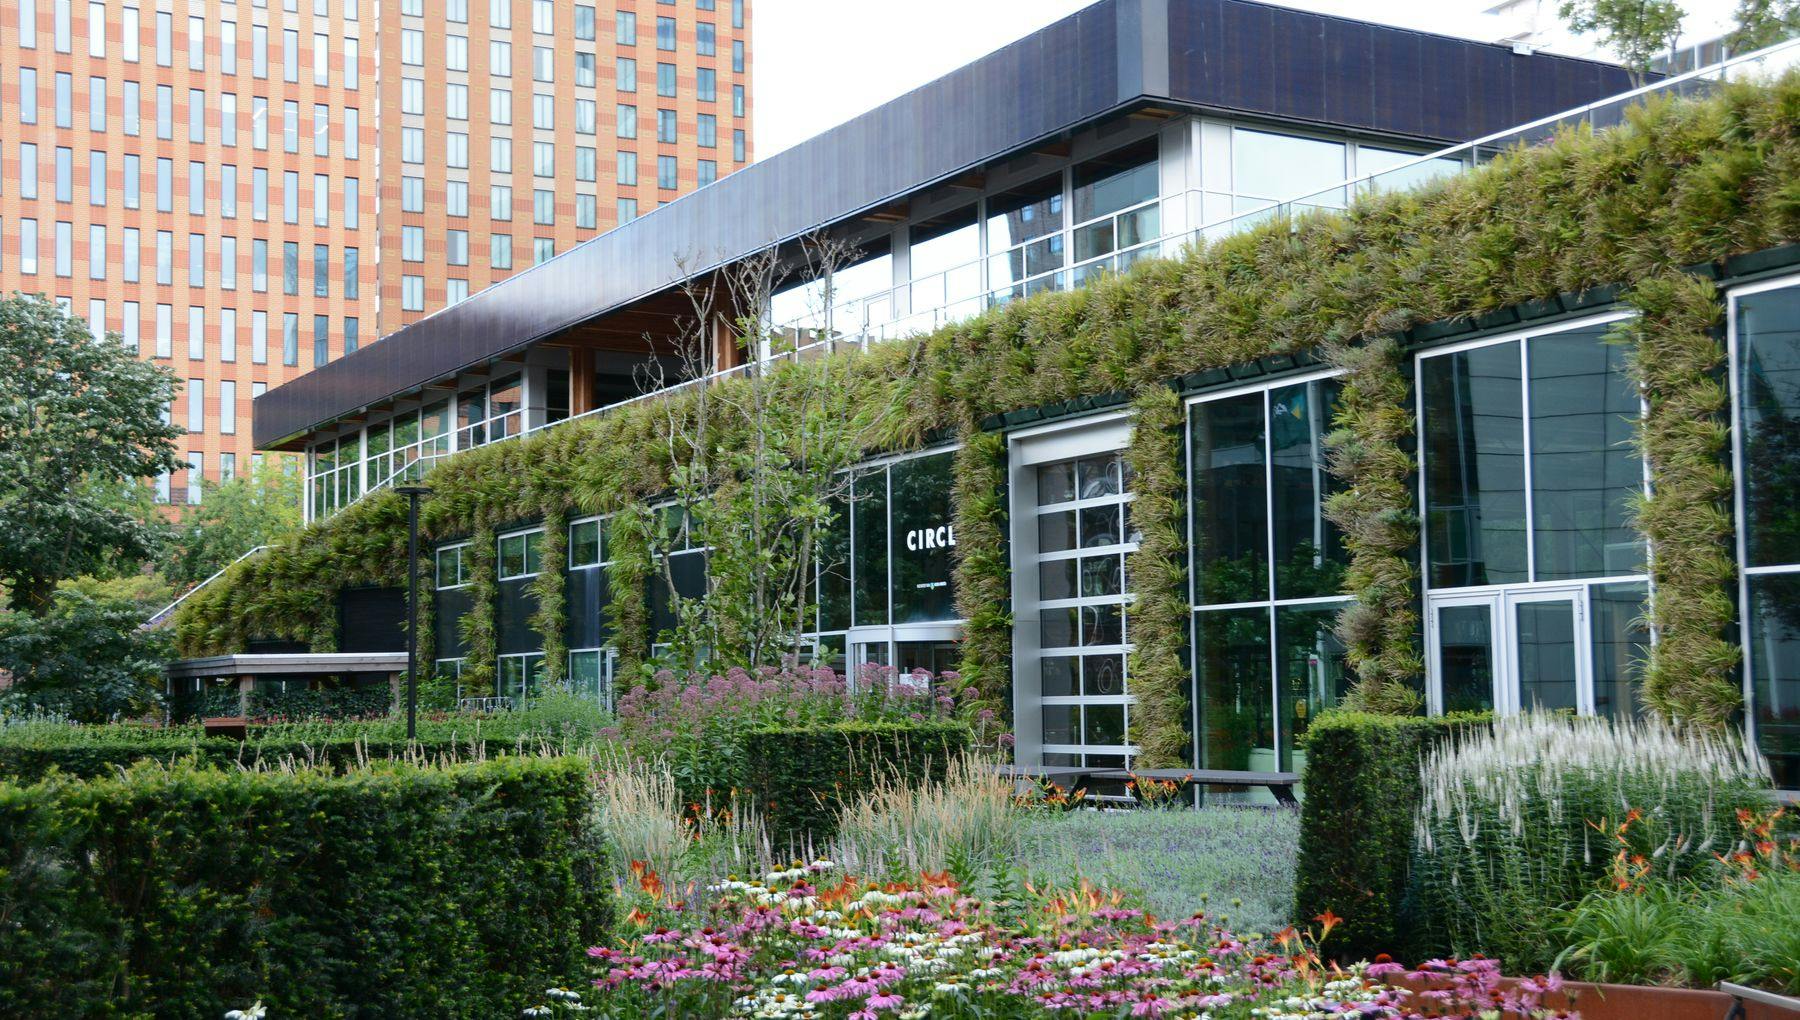 The Circl is a new hotspot in the Zuidas business district, with a restaurant and a rooftop bar. You can go to Circl to work, have a drink or a meal, meet people or attend a lecture.